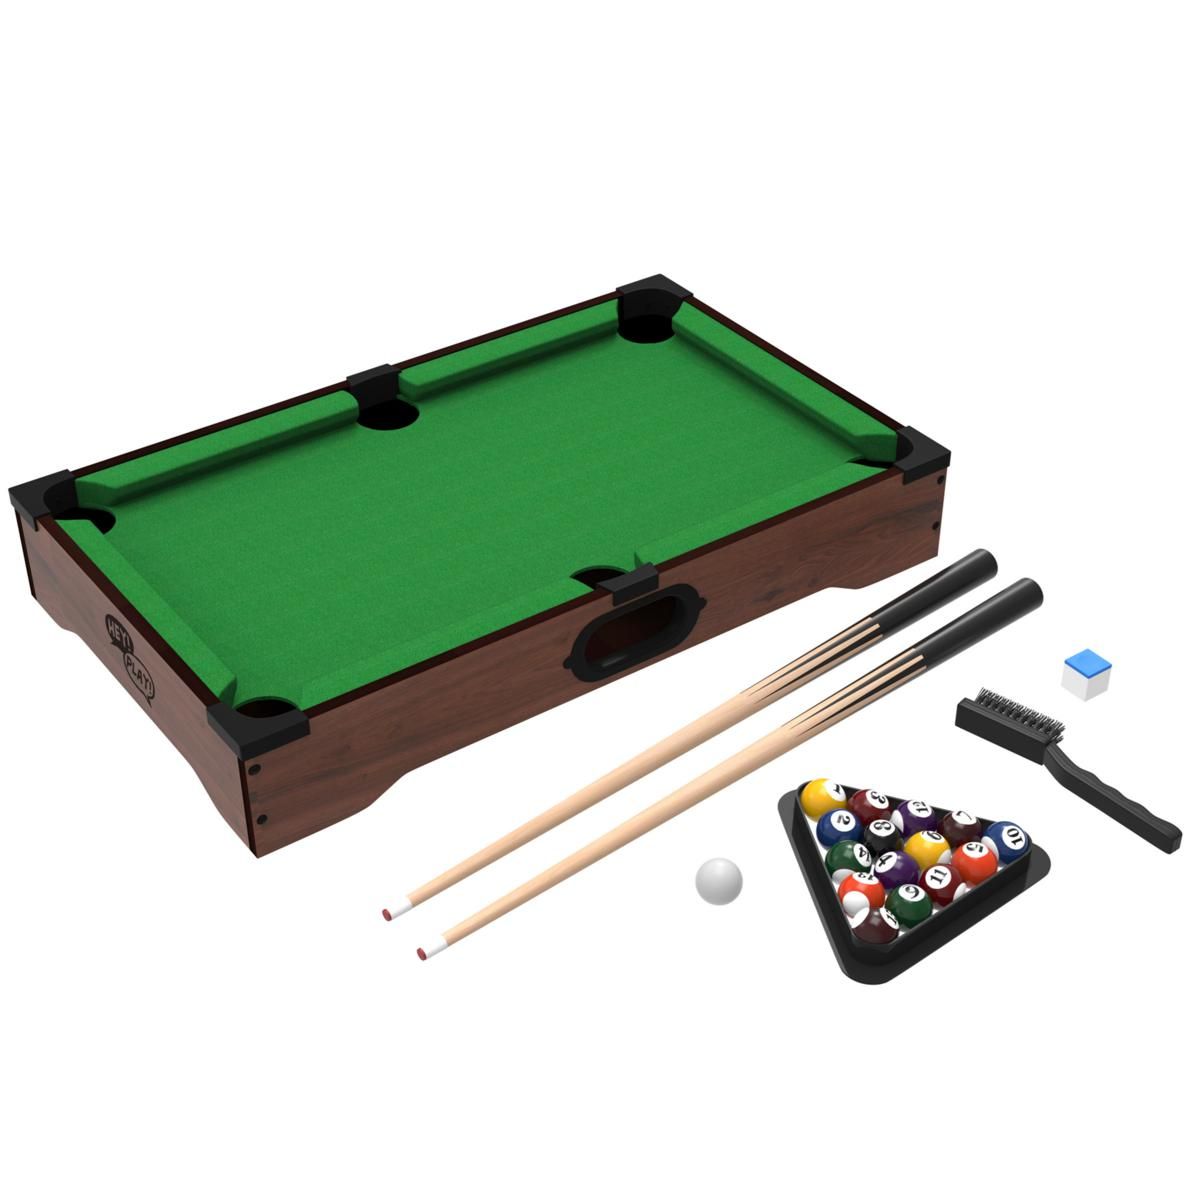 Trademark Games™ Mini Table Top Pool Table with Accessories - 6498540 | HSN | HSN